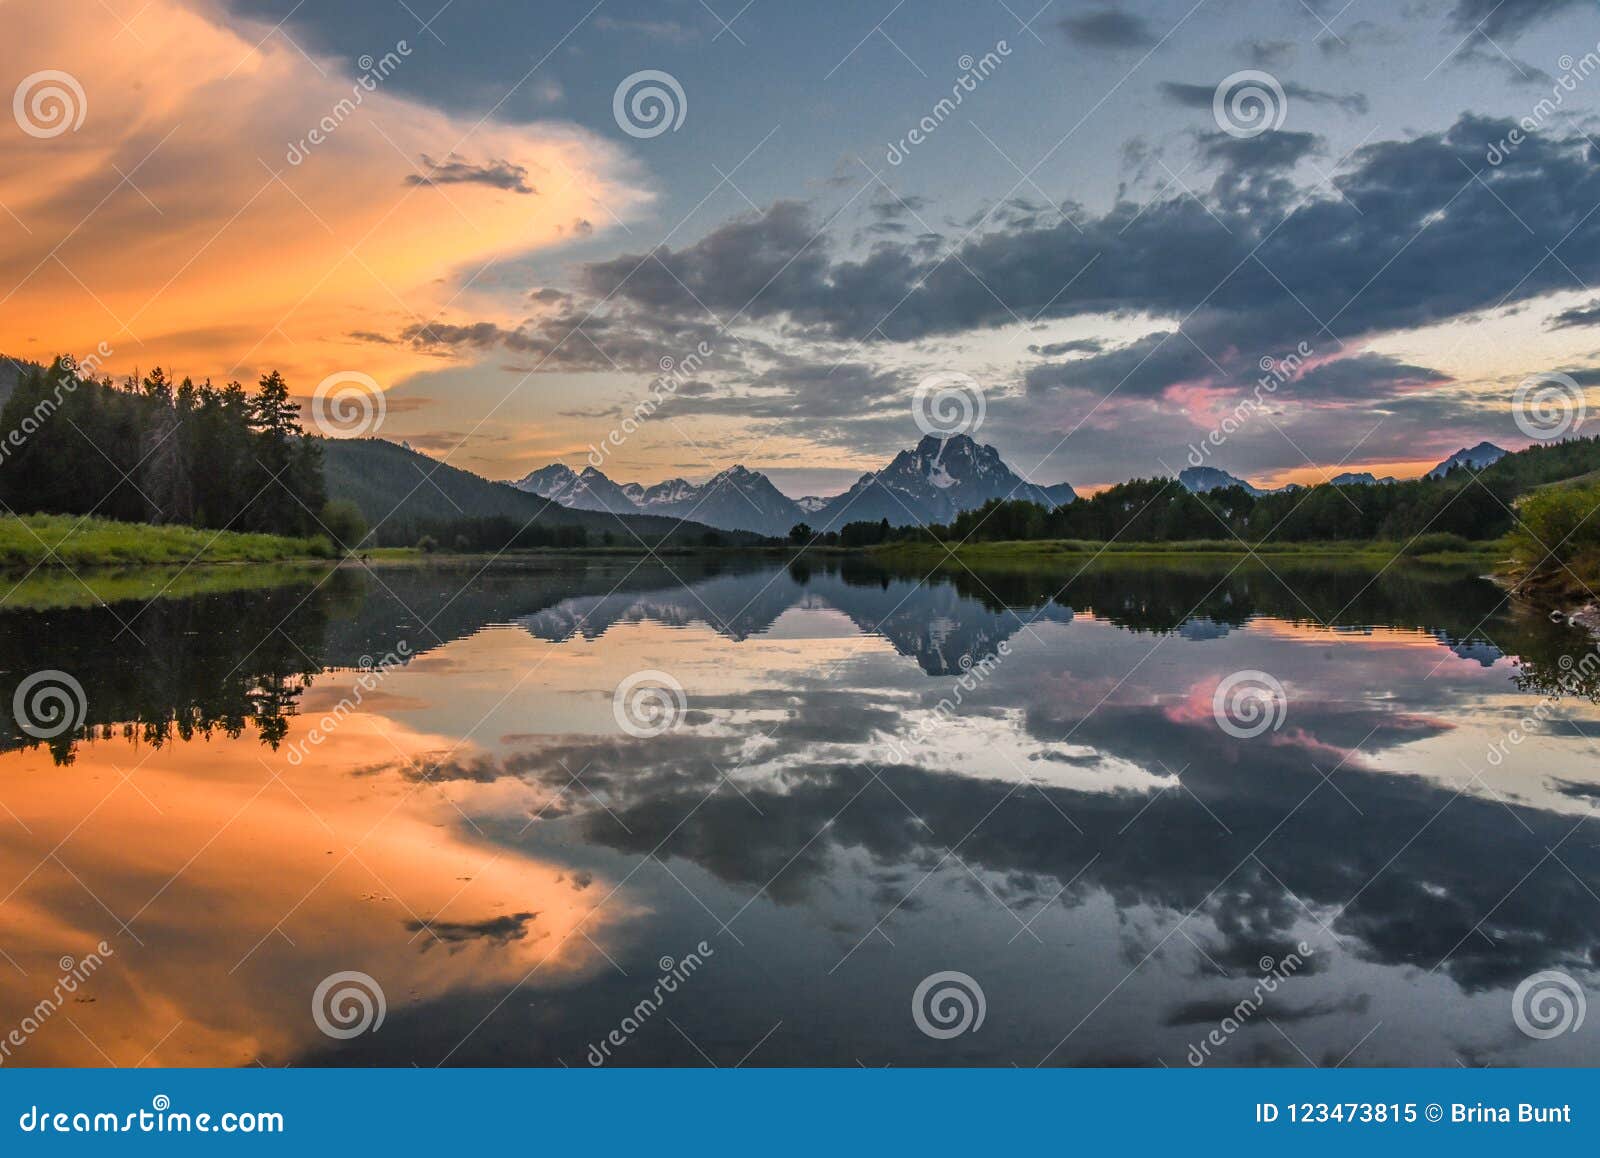 reflection of grand tetons in jackson lake at sunset with beautiful clouds